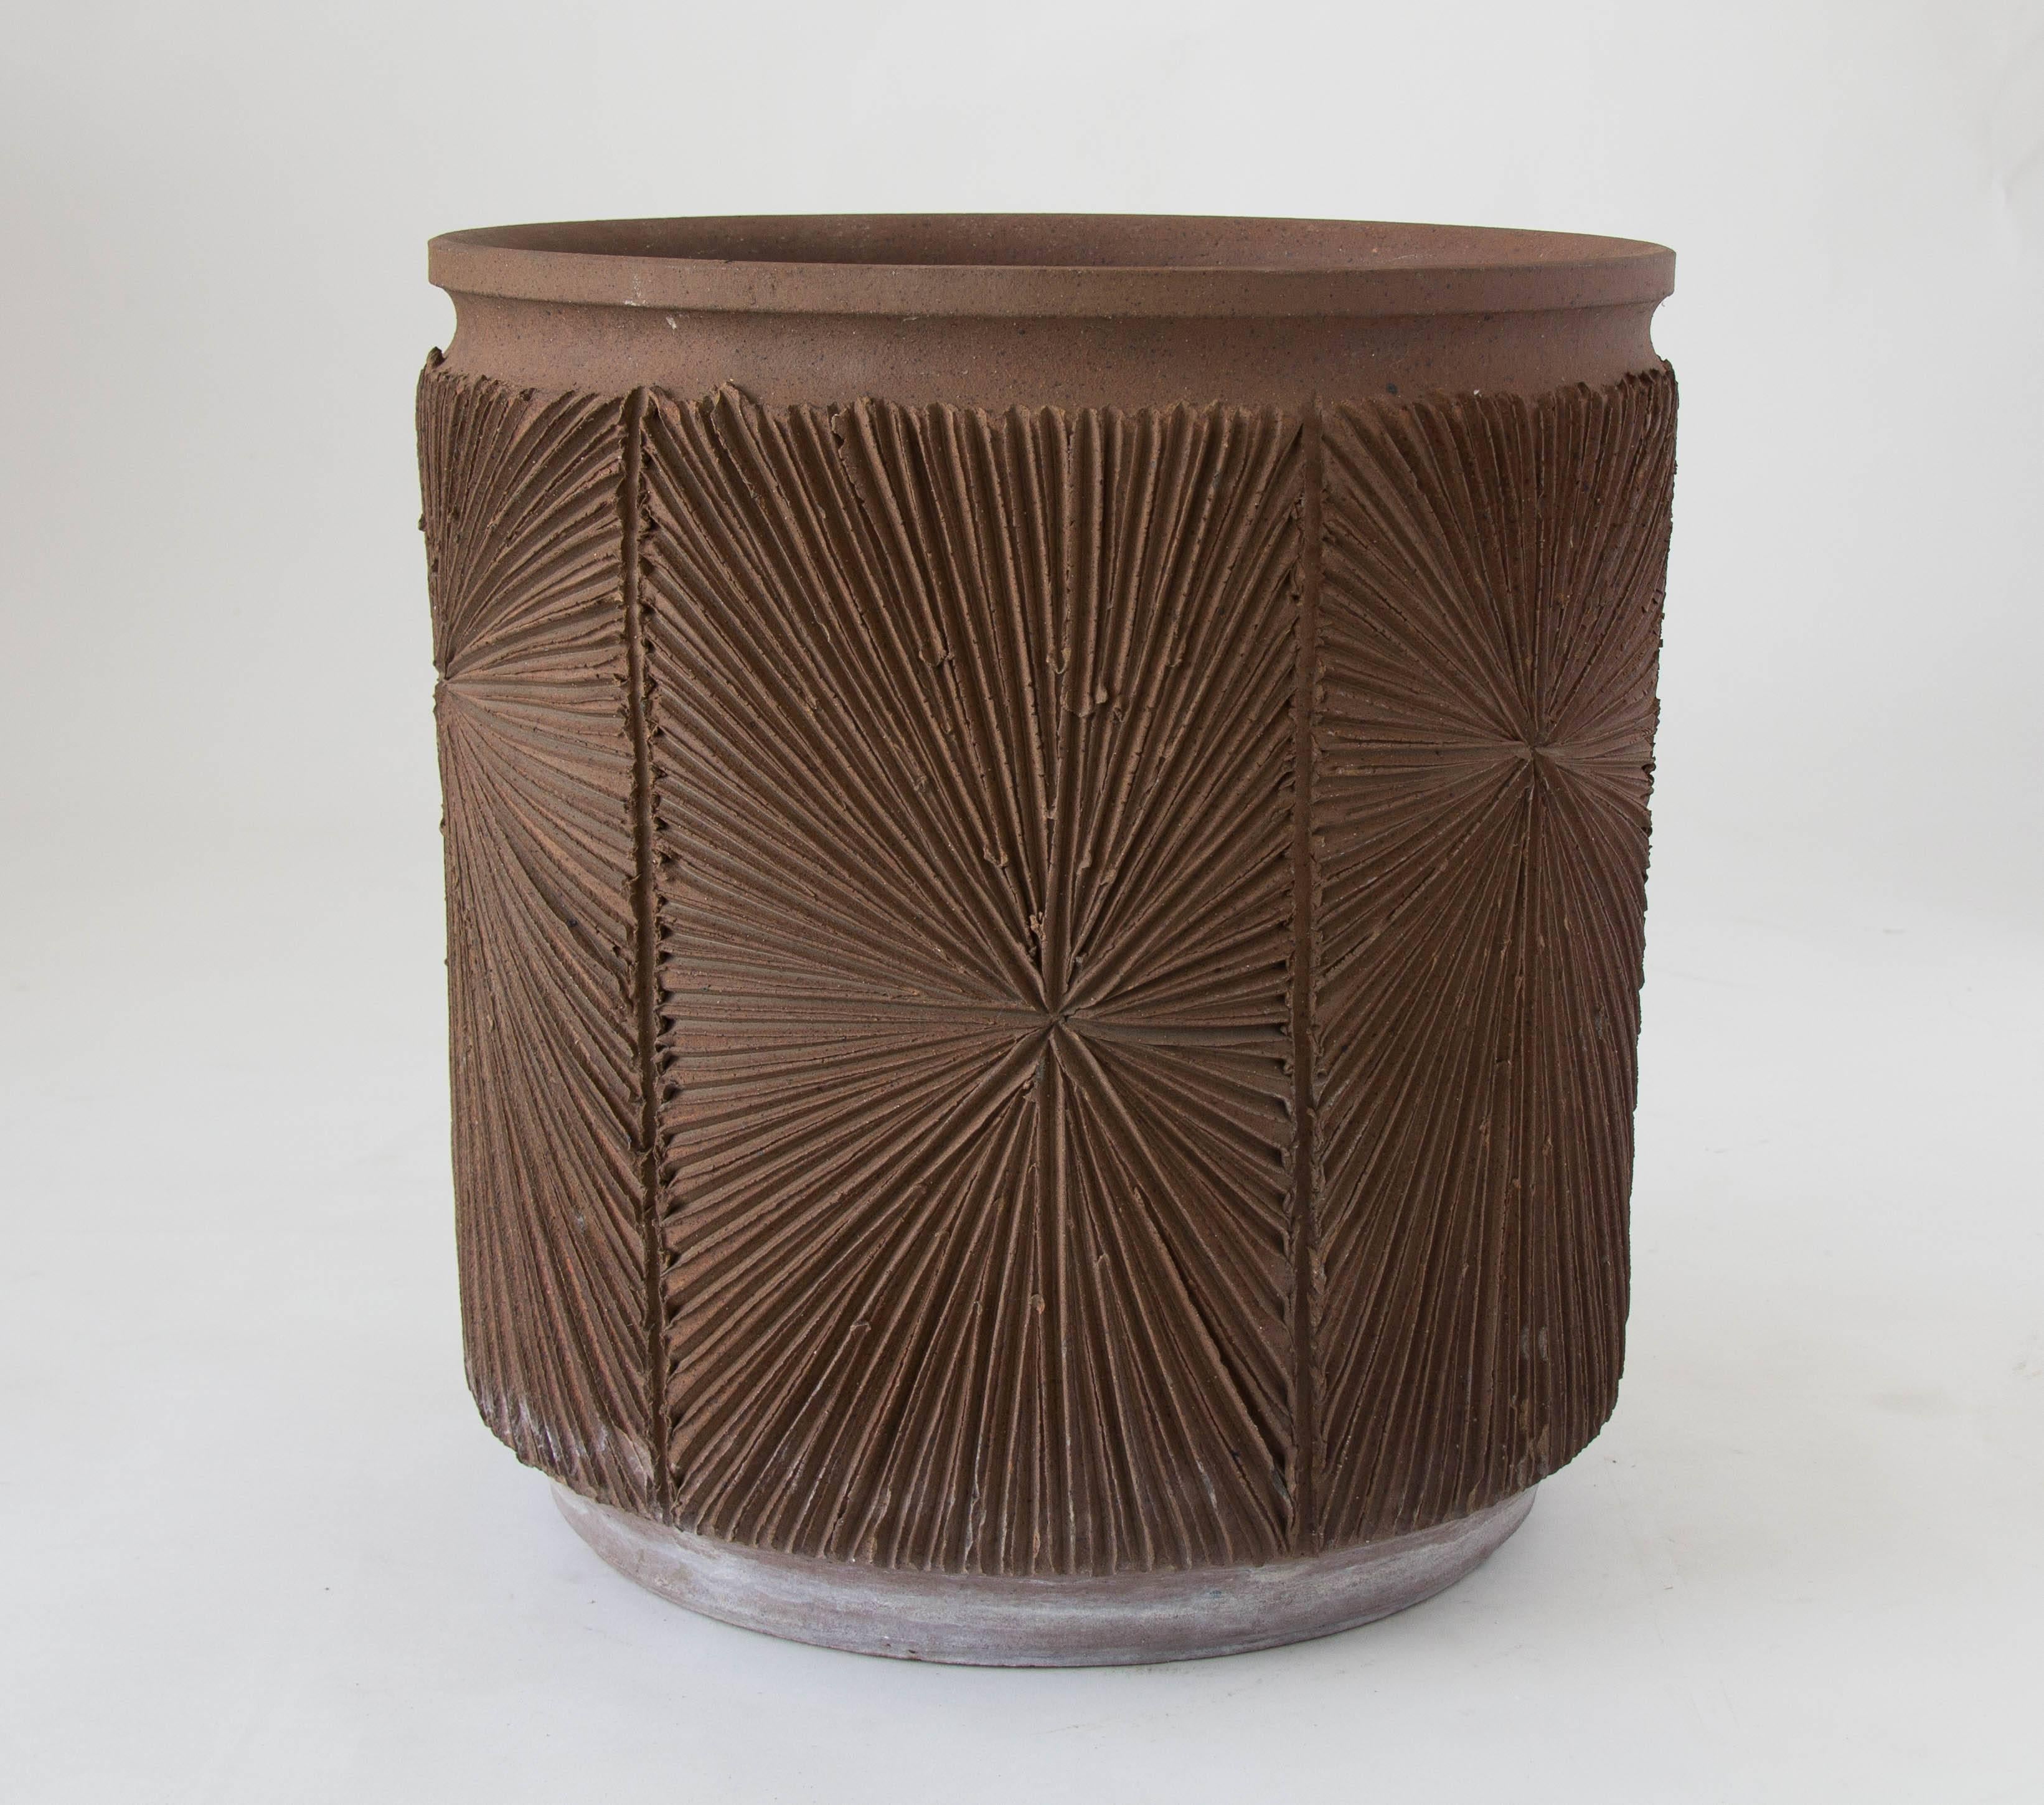 American Robert Maxwell and David Cressey Earthgender Large Cylindrical Planter